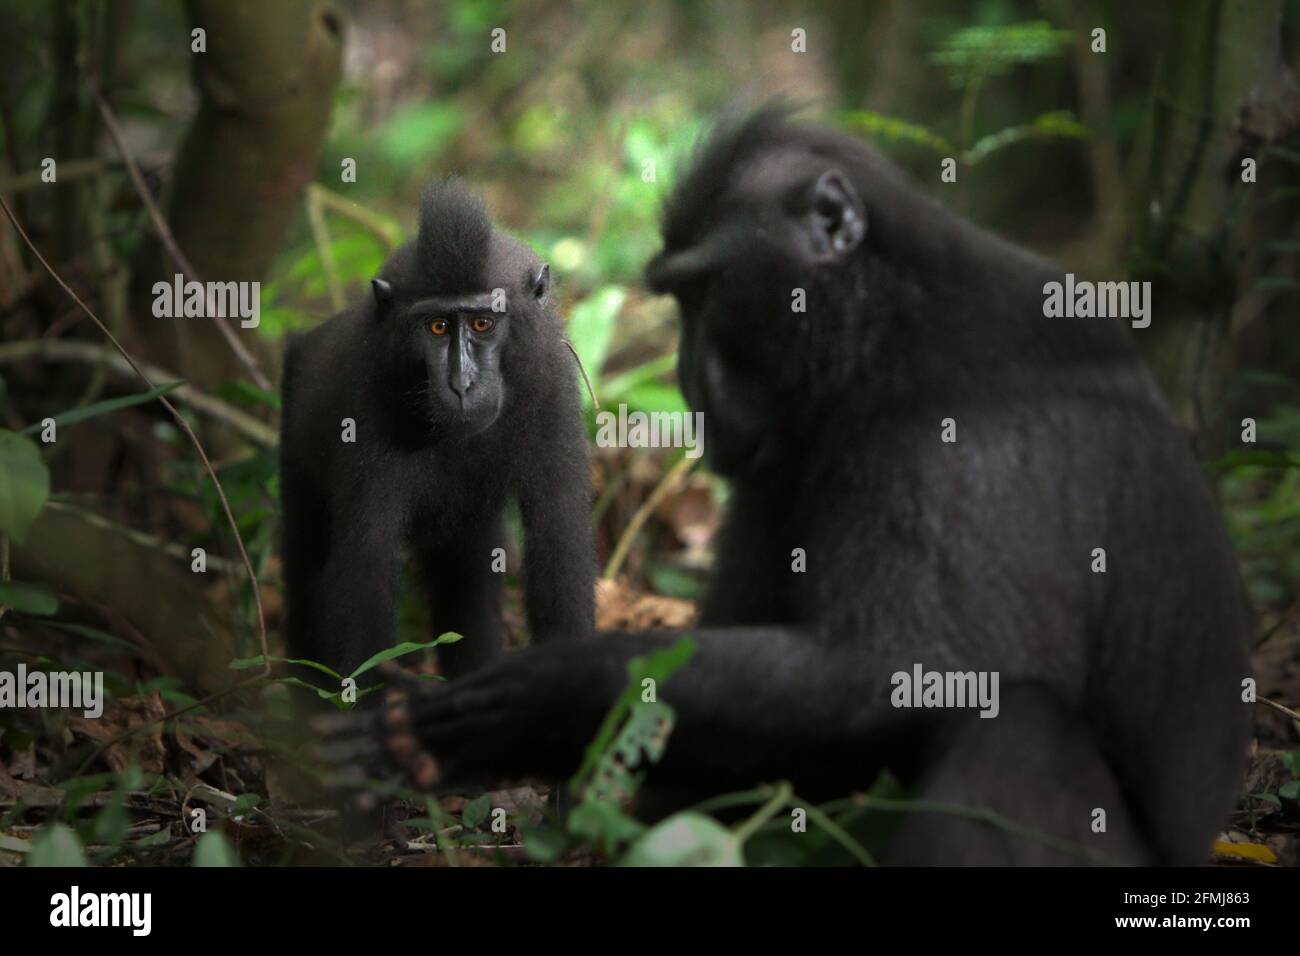 A young Sulawesi crested black macaque in a foreground of older individual in Tangkoko Nature Reserve, North Sulawesi, Indonesia. Based on data collected from a series of tests from three adult crested macaques in captivity, primatologists revealed that Sulawesi crested black macaques are sensitive to social status of other individuals. A crested macaque 'tend to take longer to respond when viewing faces of unfamiliar high-ranking individuals,' the report said. Stock Photo